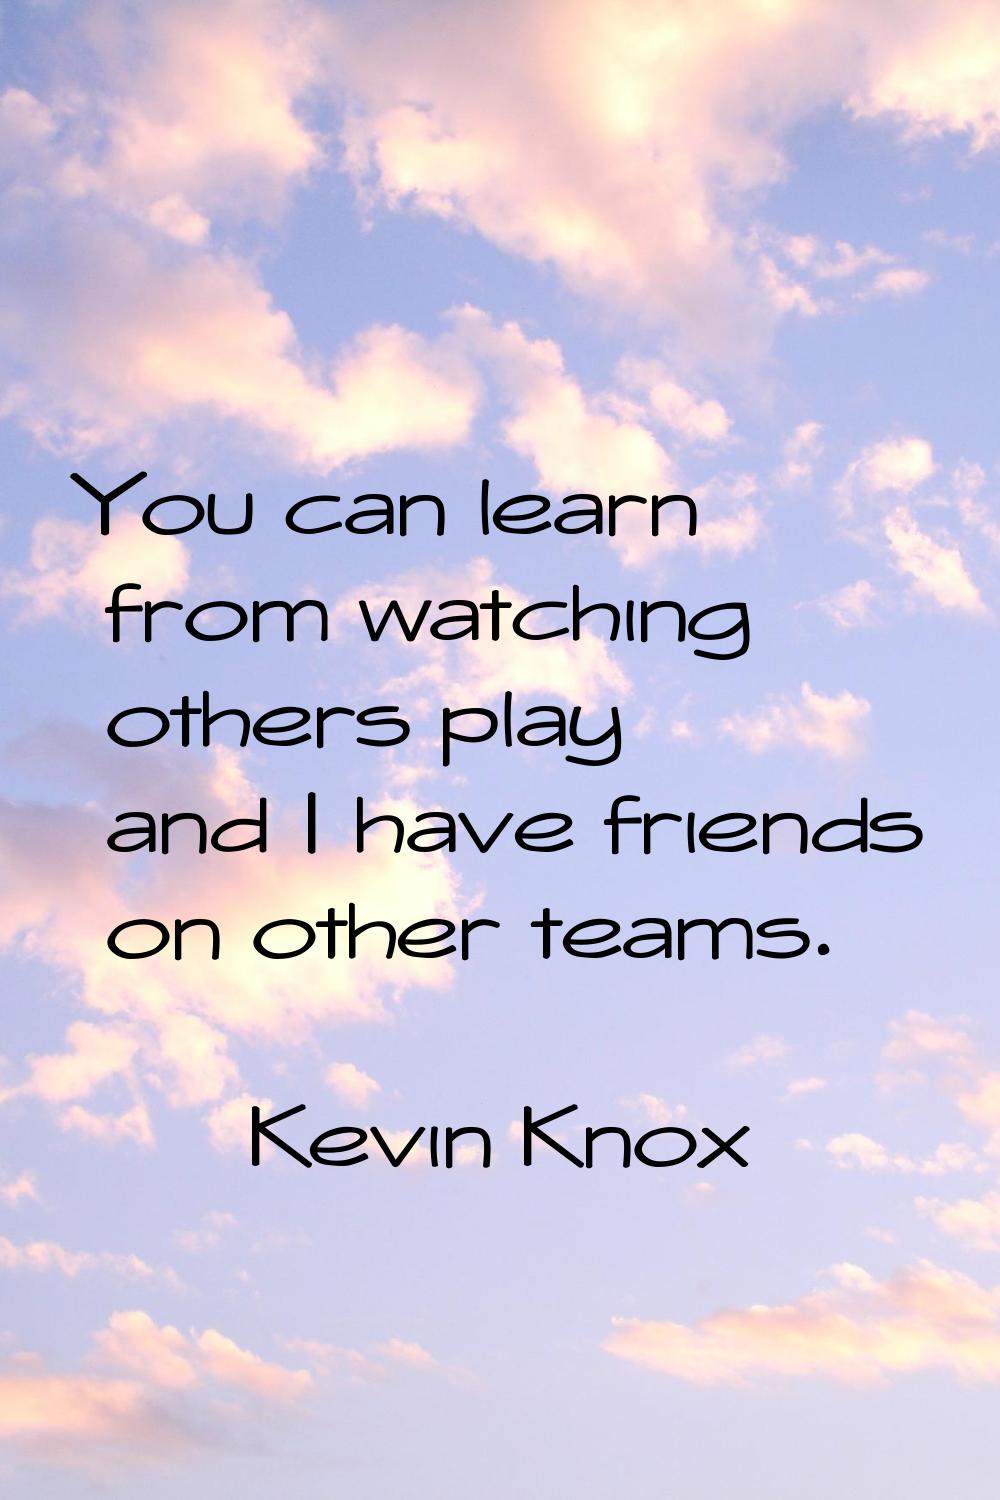 You can learn from watching others play and I have friends on other teams.